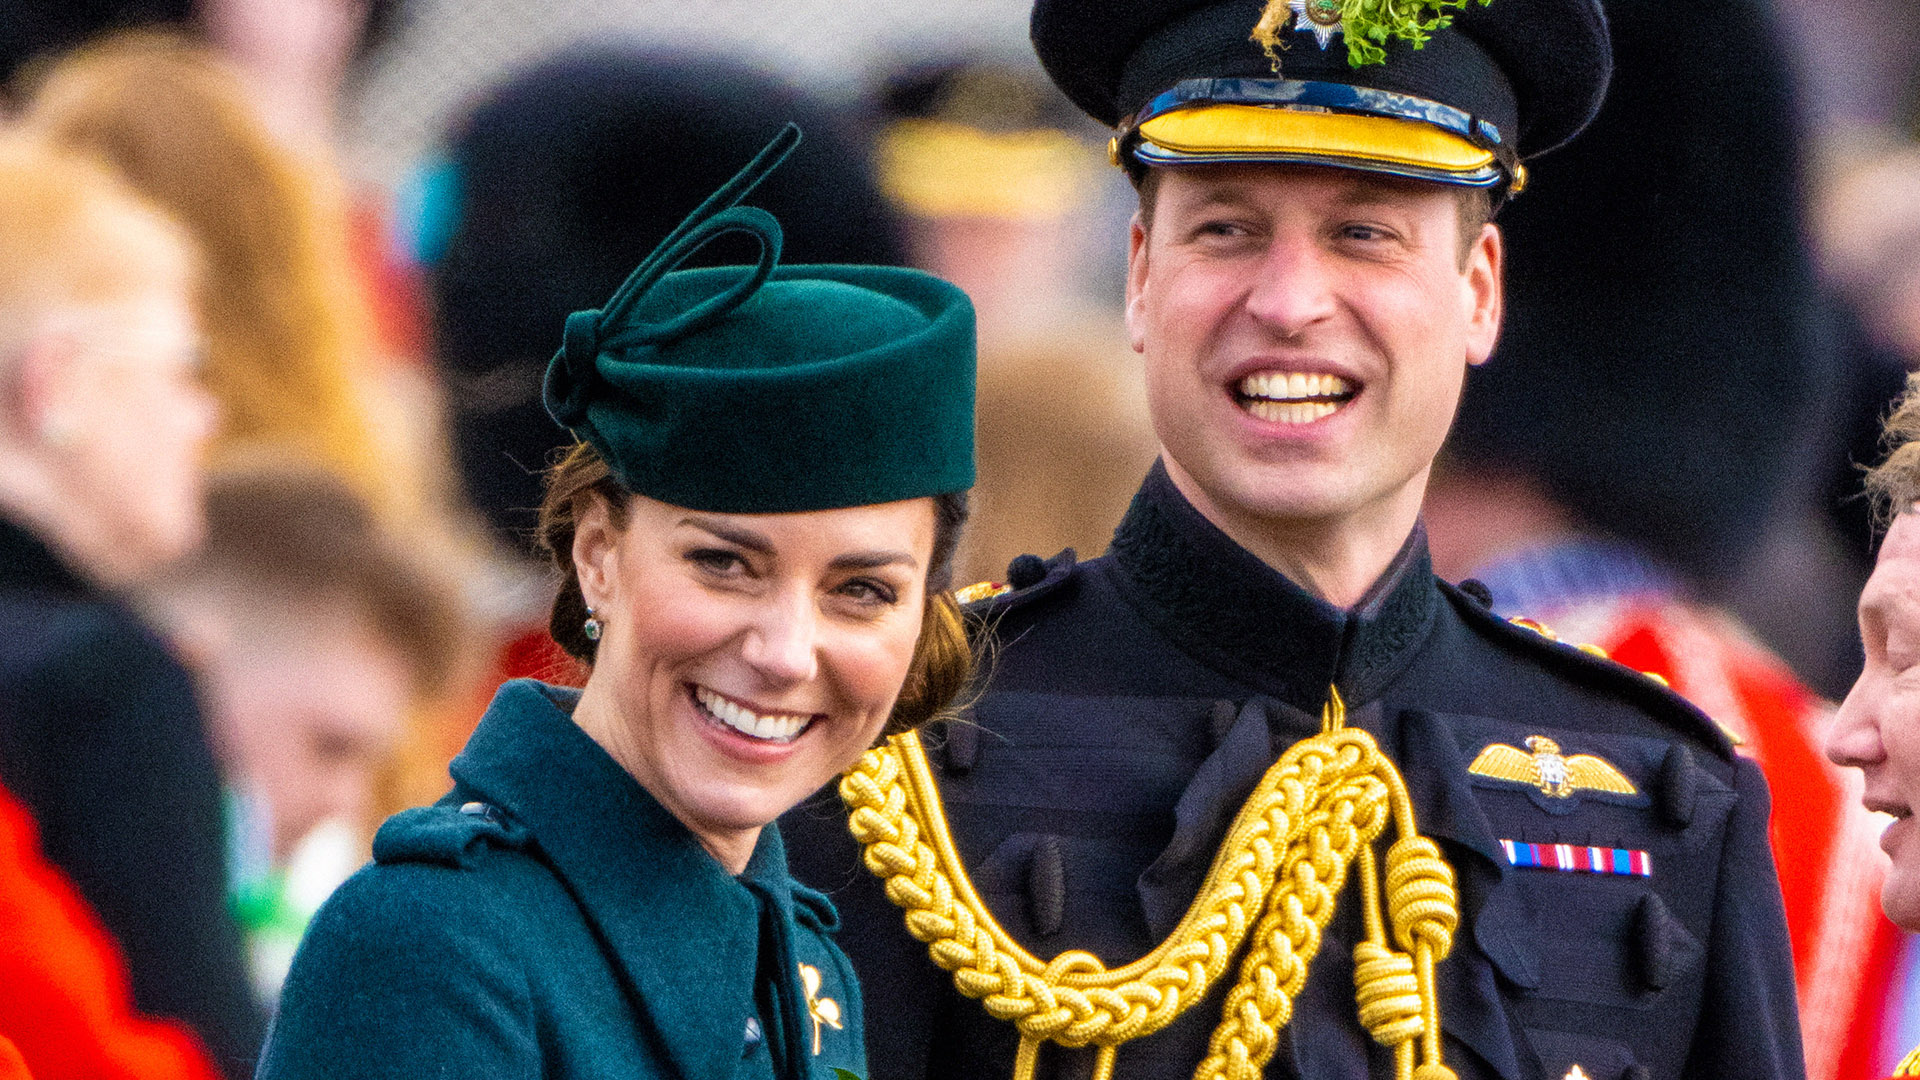 How Kate Middleton's Net Worth Compares to Other Royals